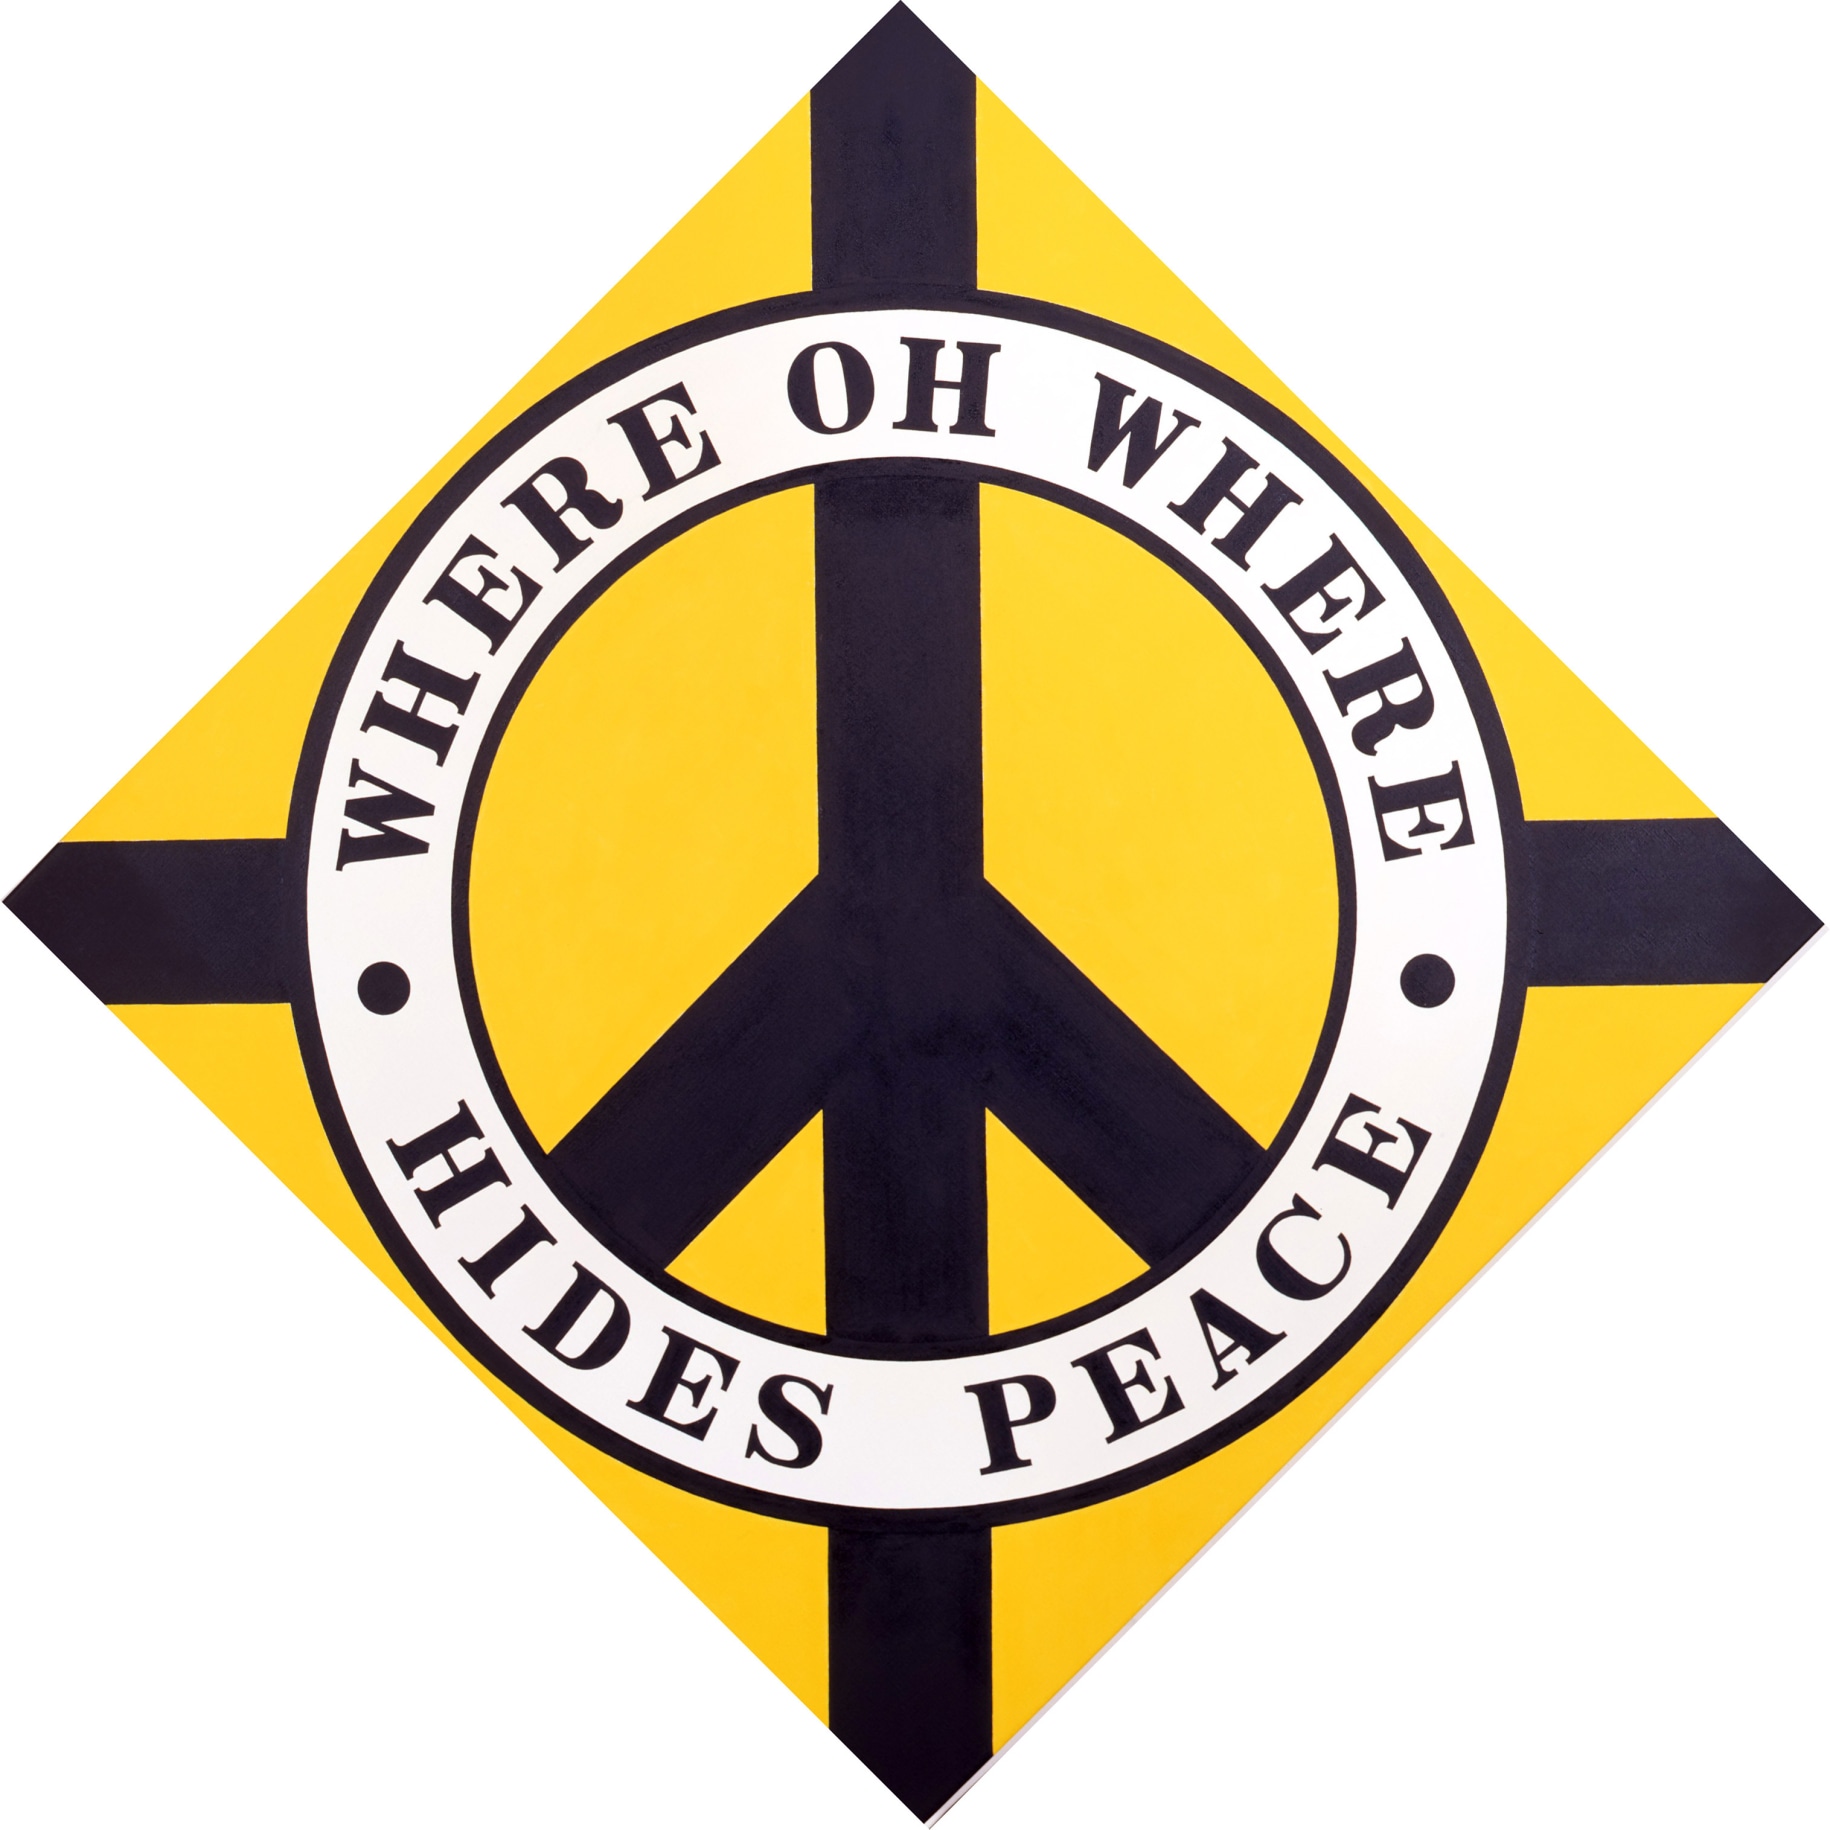 A 50 1/2 by 50 1/2 diamond shaped yellow painting with a black peace sign. The ring around the peace sign is white with black outlines. In it the work's title, &quot;Where Oh Where Hides Peace,&quot; is painted in black letters. &quot;Where Oh Where&quot; appears on the top half, and &quot;Hides Peace&quot; appears on the bottom half. A small black circle has been painted to the side of each &quot;where.&quot; Black rectangular bands of paint go from the outer edge of the circle to each corner of the triangle.